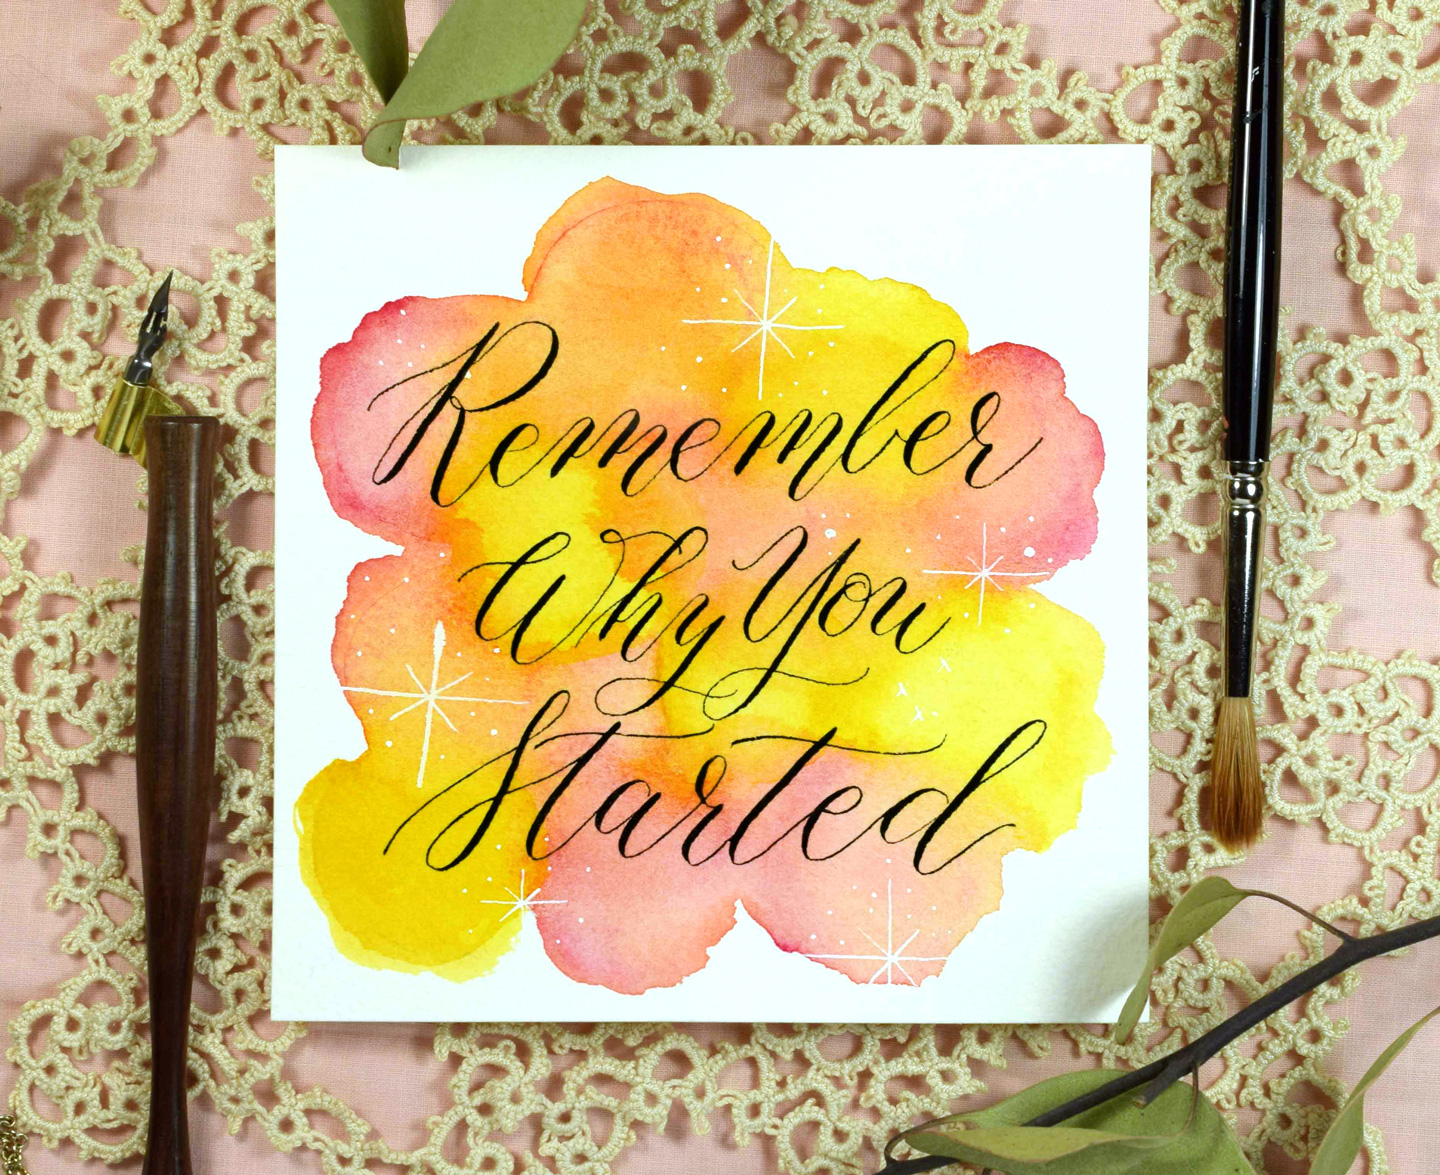 How to Combine Inked Calligraphy With Watercolors